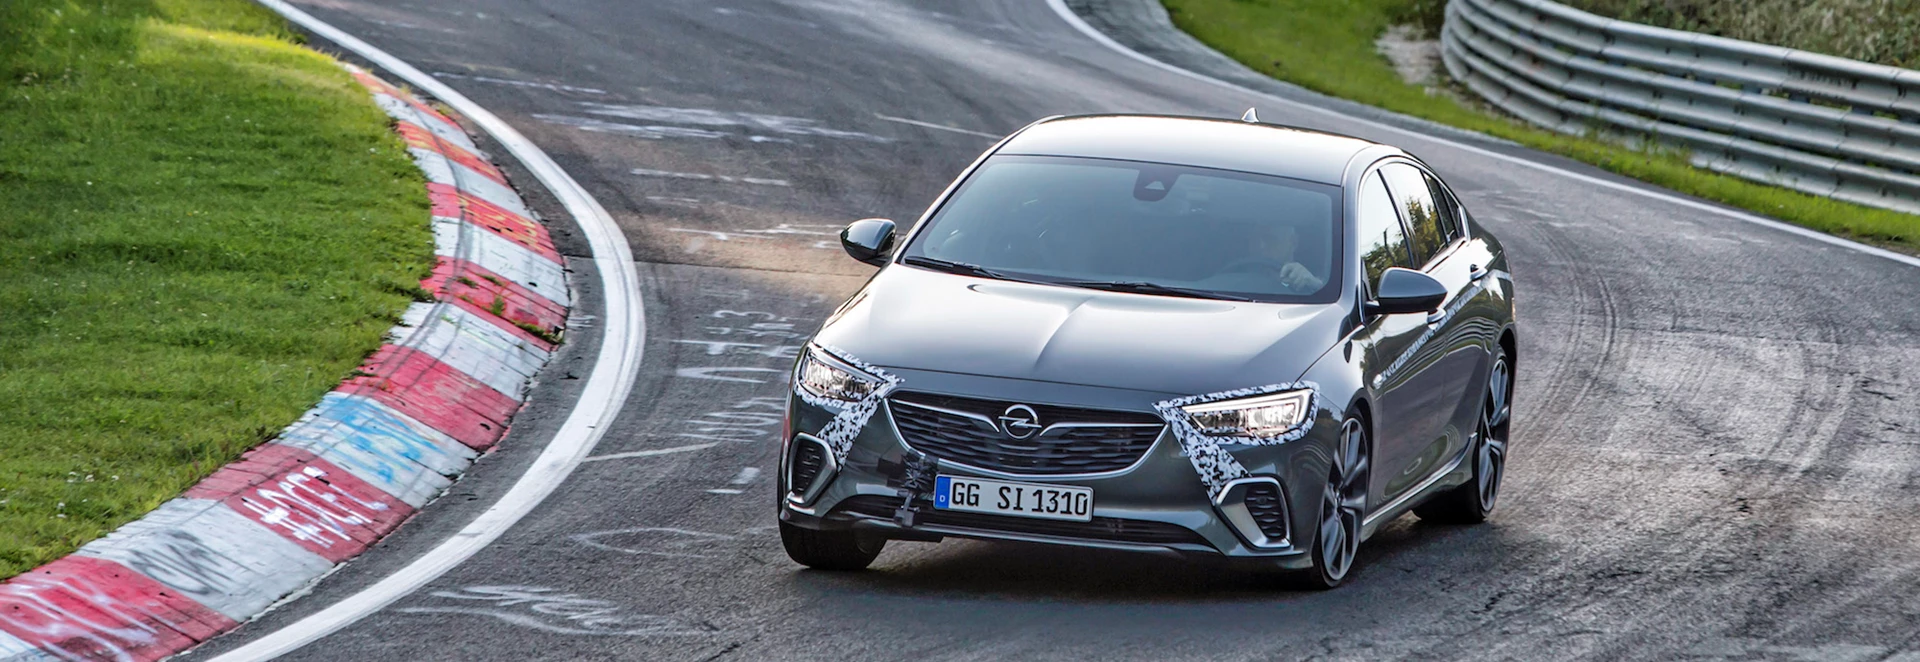 Insignia GSi becomes fastest Vauxhall at Nürburgring 